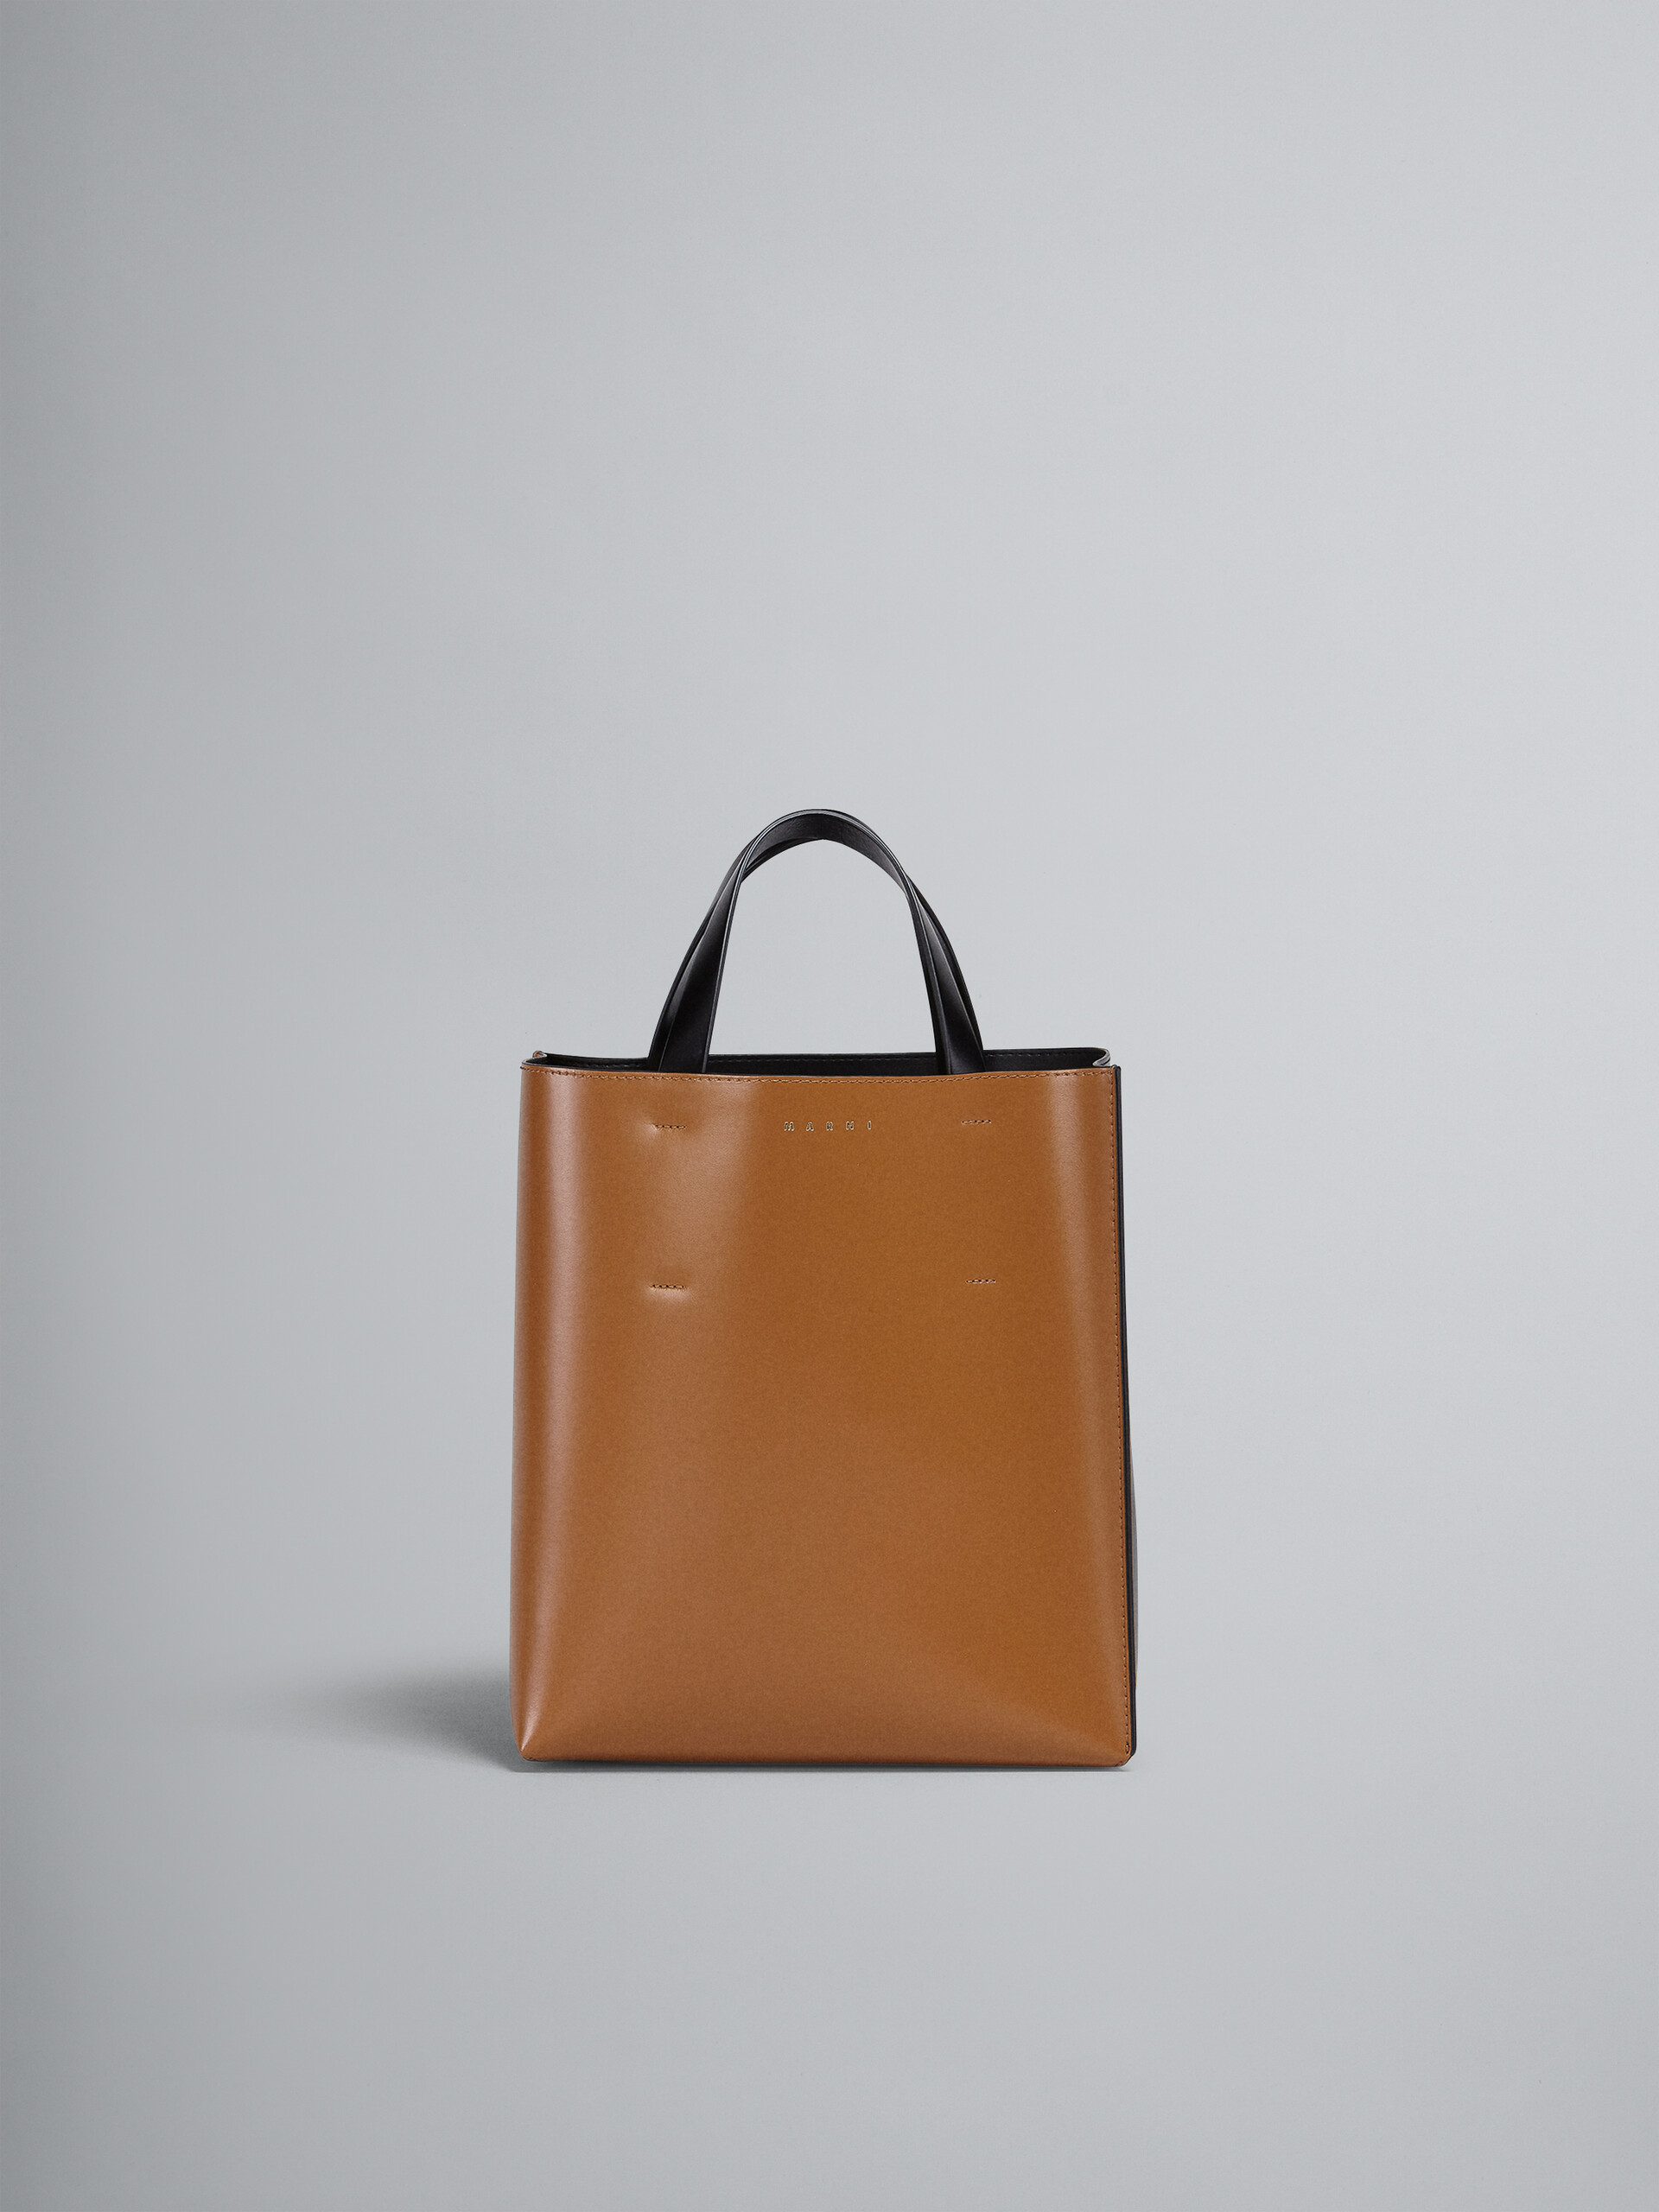 MUSEO small bag in brown and black leather